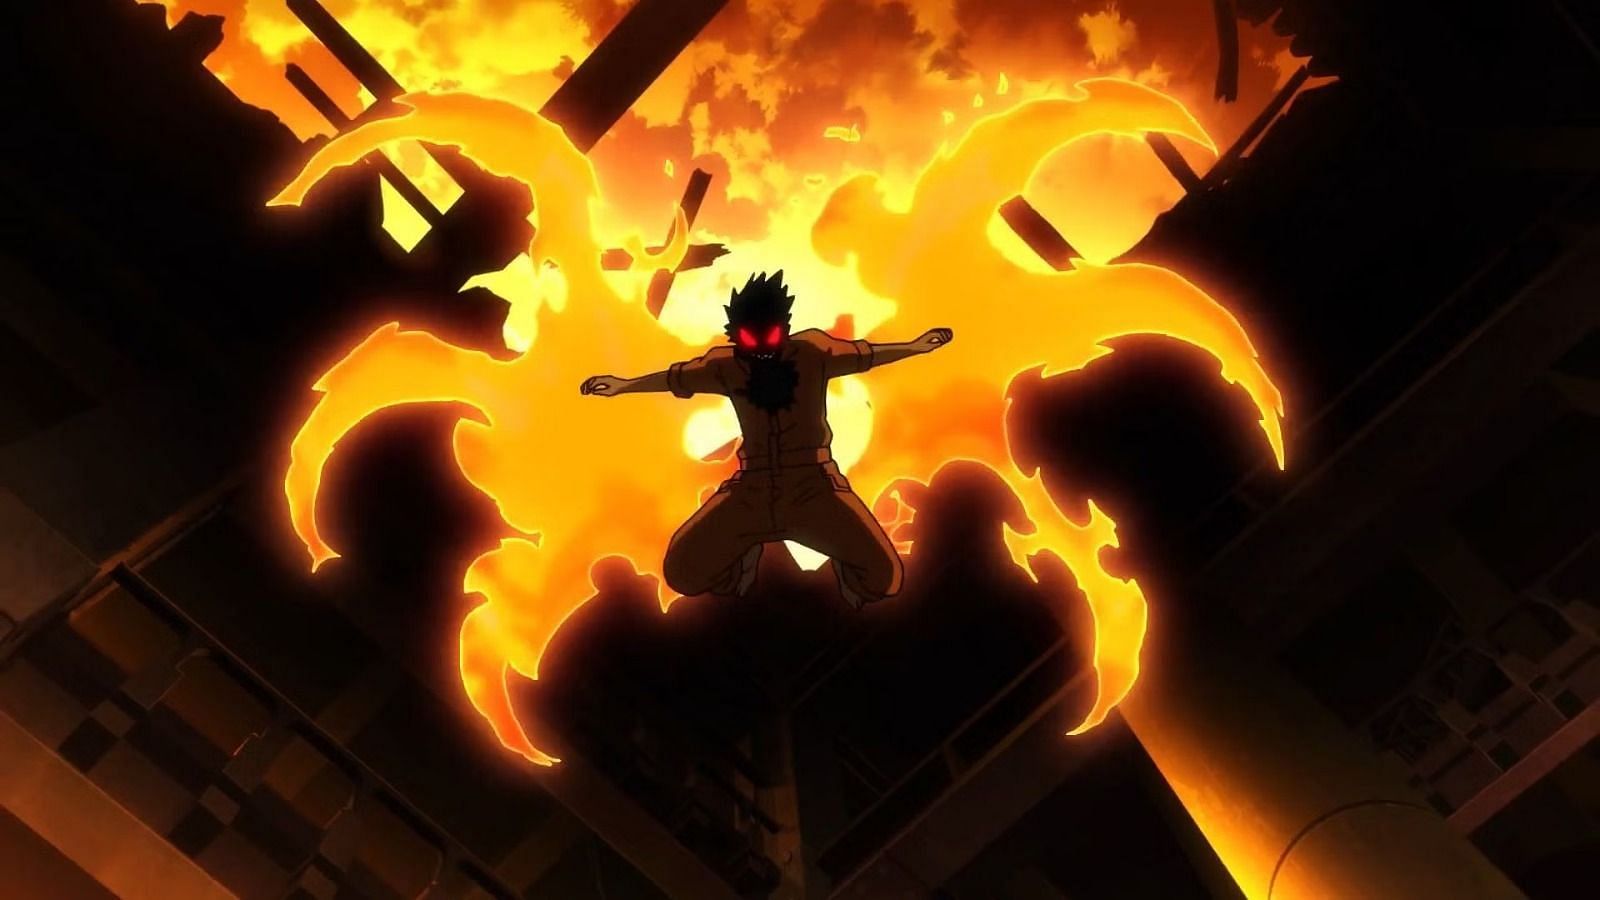 Fire Force season 2: Where does the anime leave off in the manga series